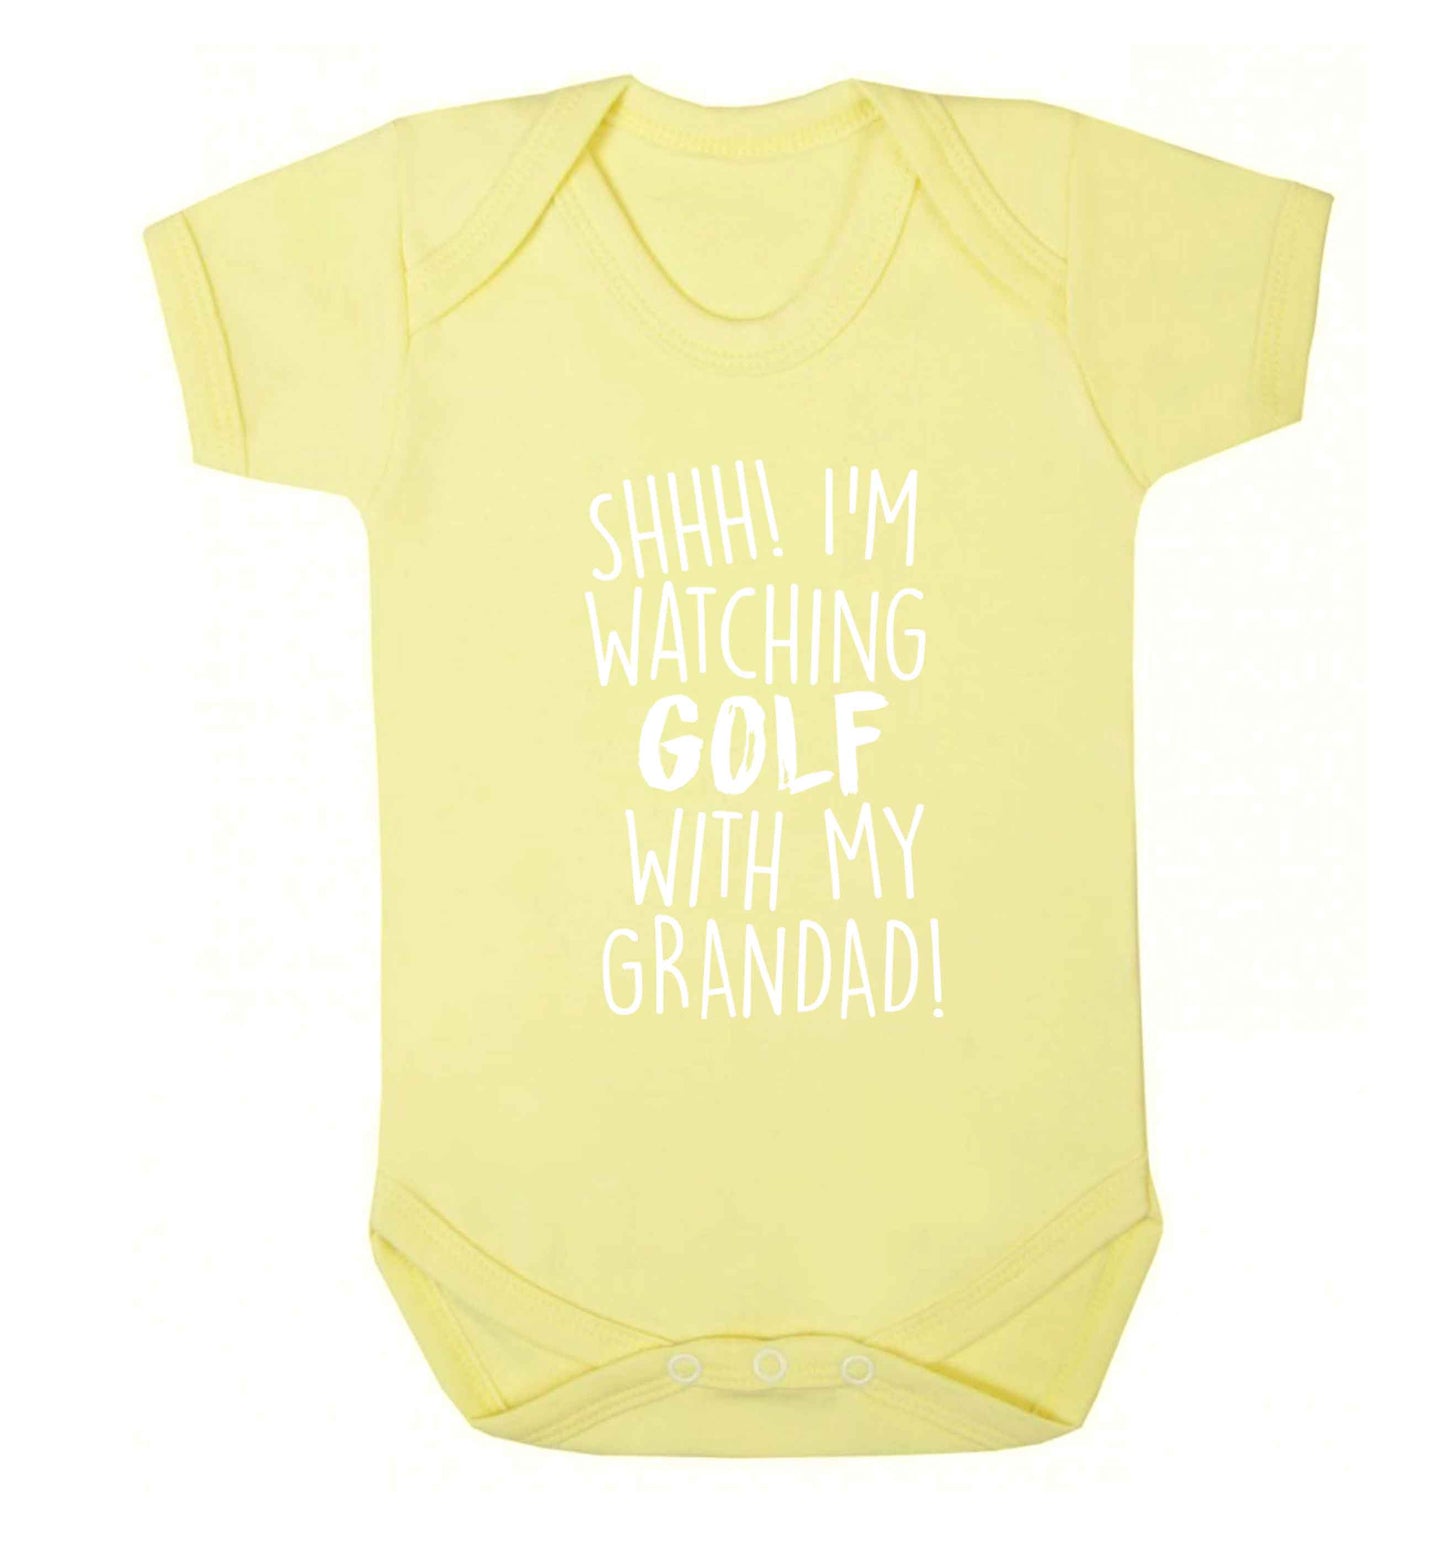 Shh I'm watching golf with my grandad Baby Vest pale yellow 18-24 months